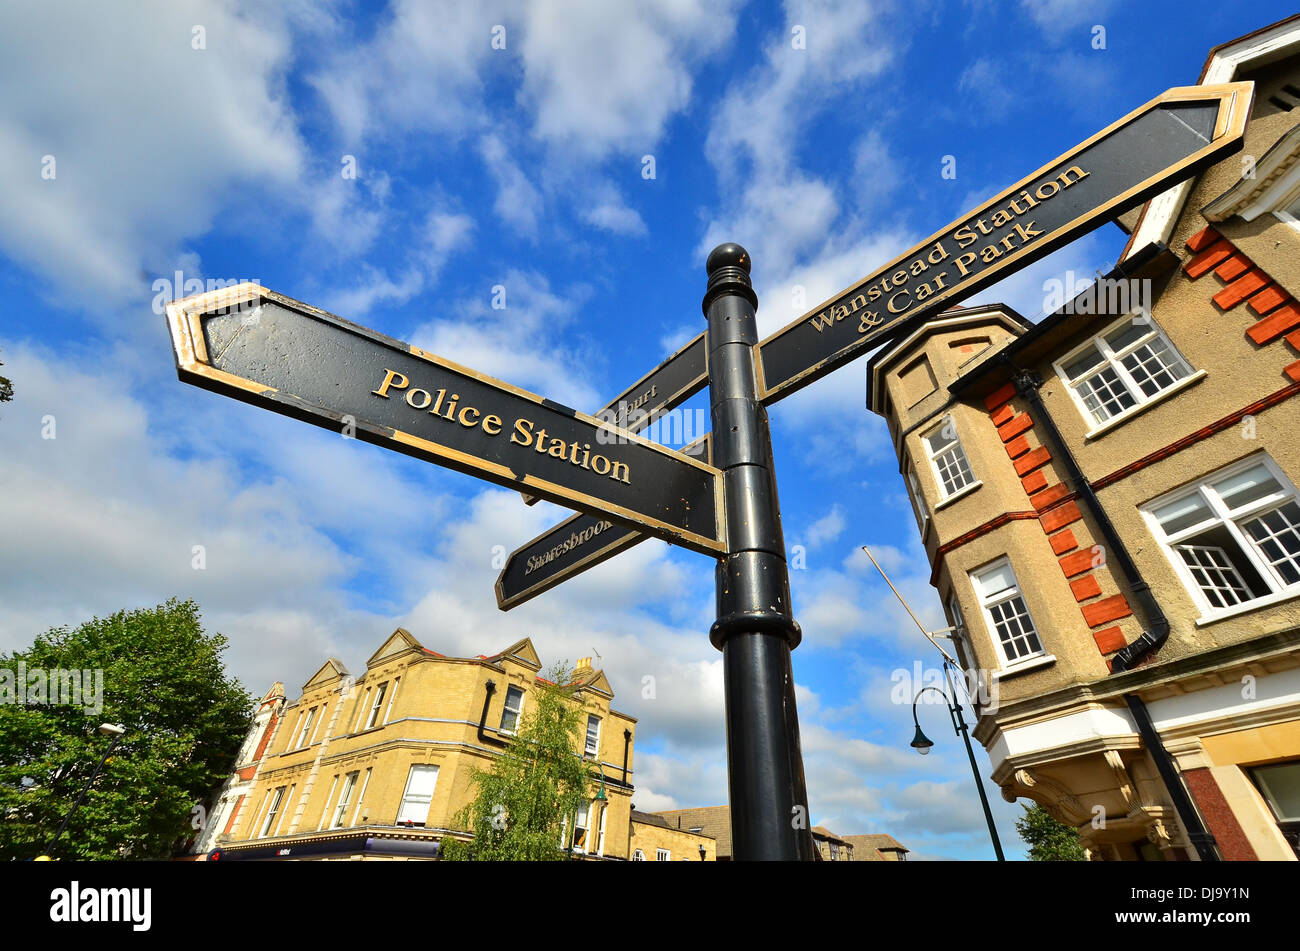 Street sign in Wanstead High Street showing way to Police Station and Tube Station Stock Photo